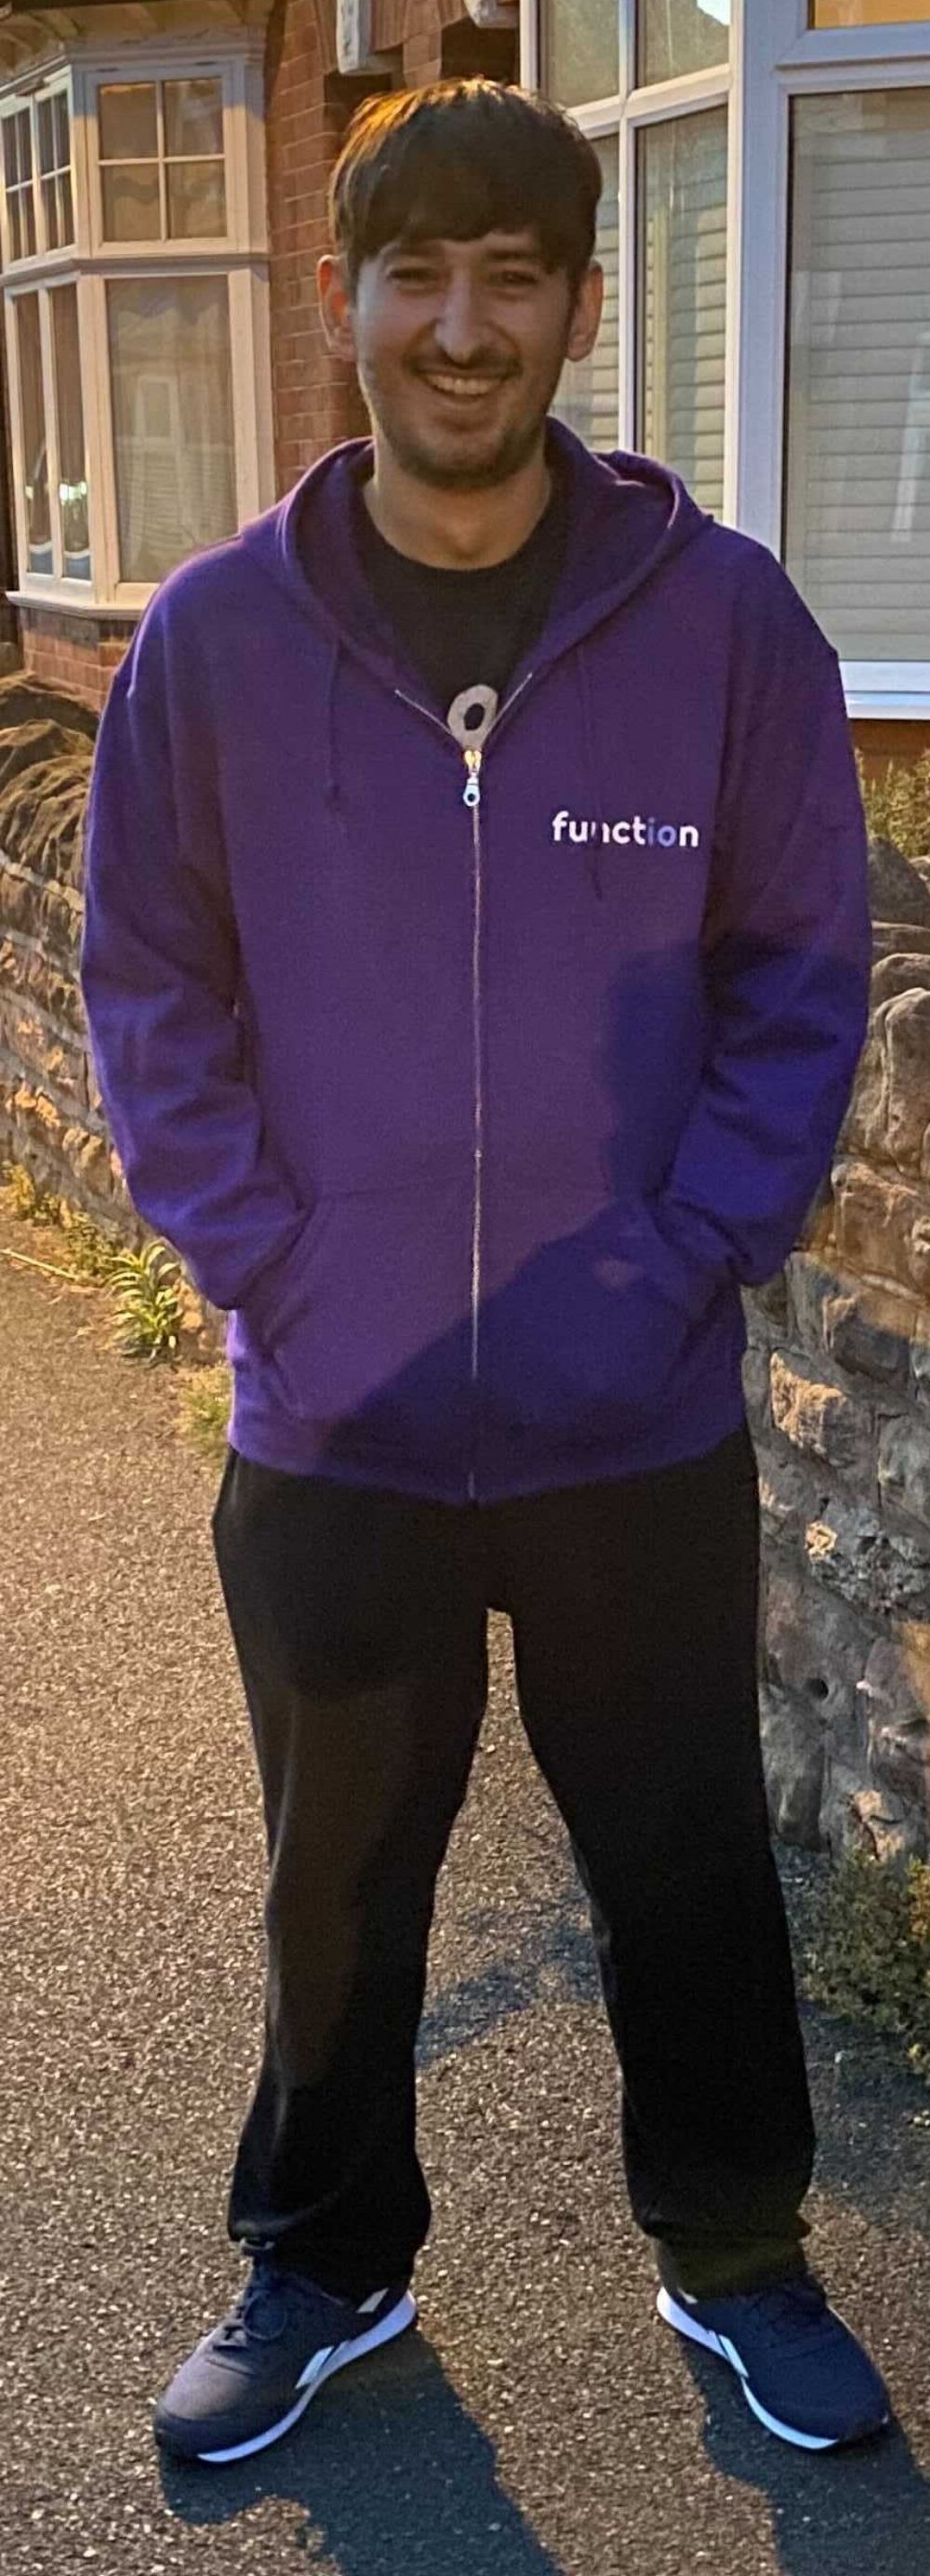 Jamie standing in the street, with his new bright purple Project Function hoodie on, smiling